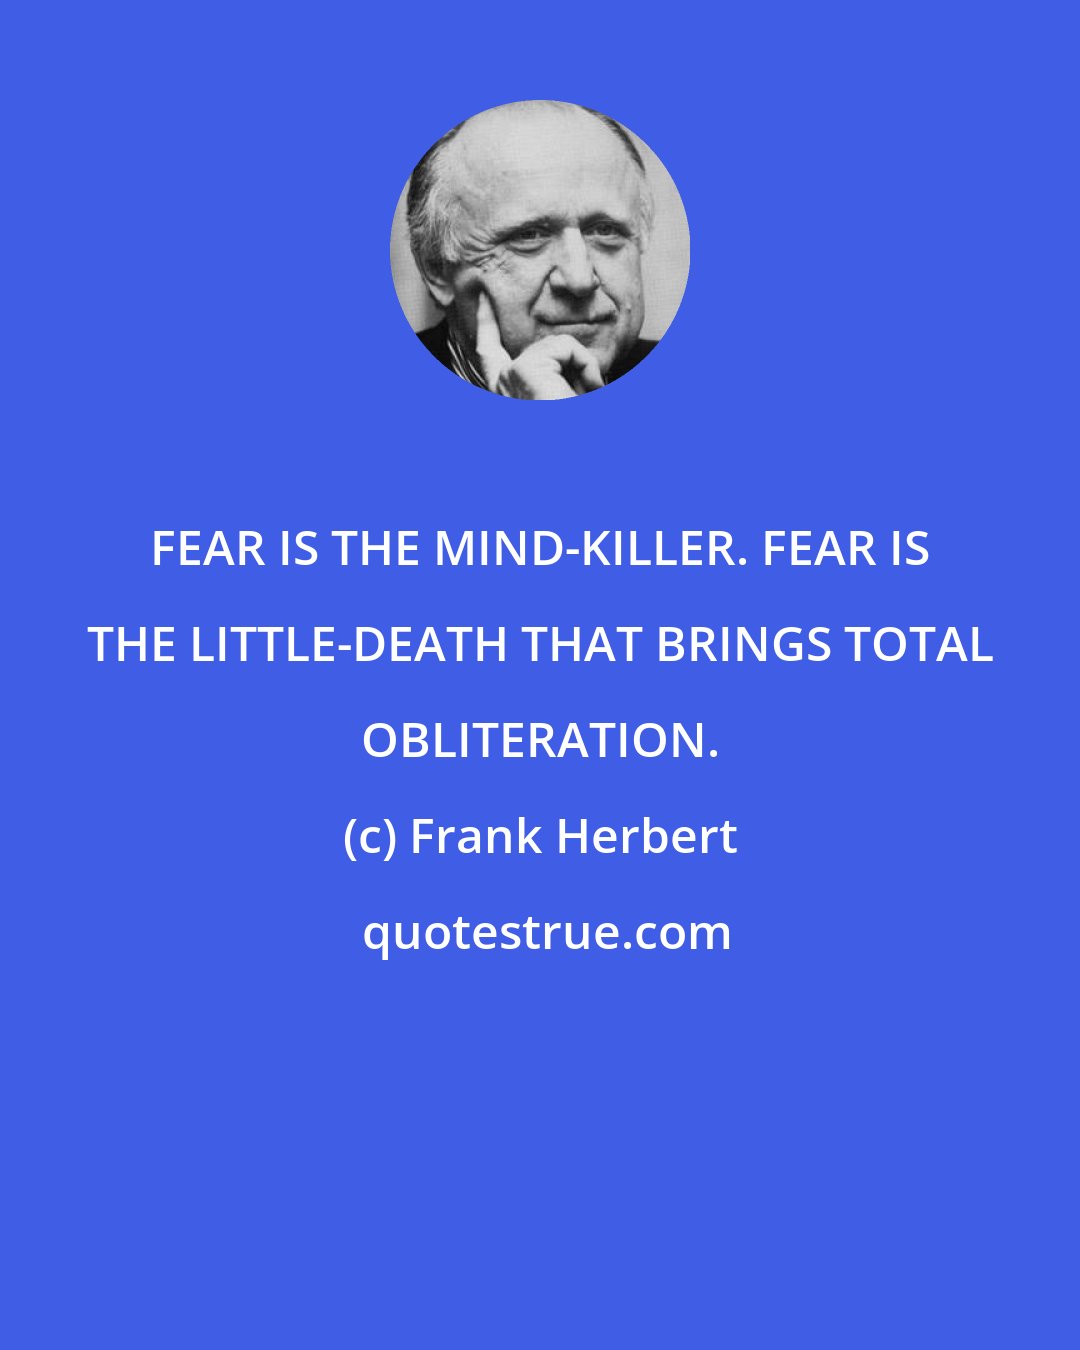 Frank Herbert: FEAR IS THE MIND-KILLER. FEAR IS THE LITTLE-DEATH THAT BRINGS TOTAL OBLITERATION.